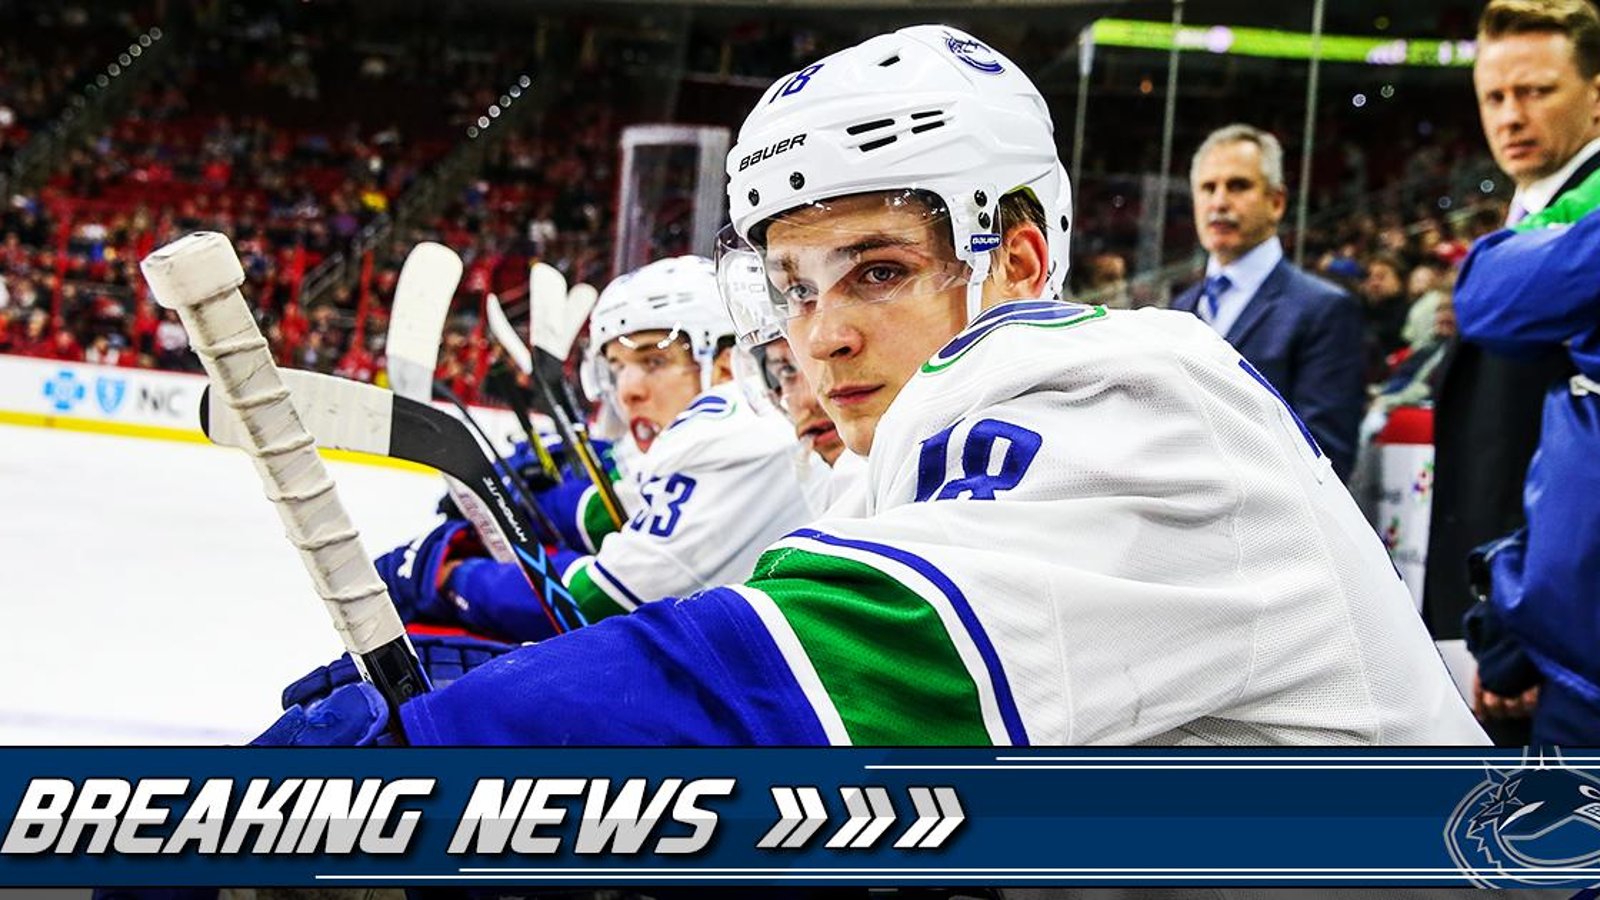 Insider breaks down Vancouver's controversial decision to select Virtanen.